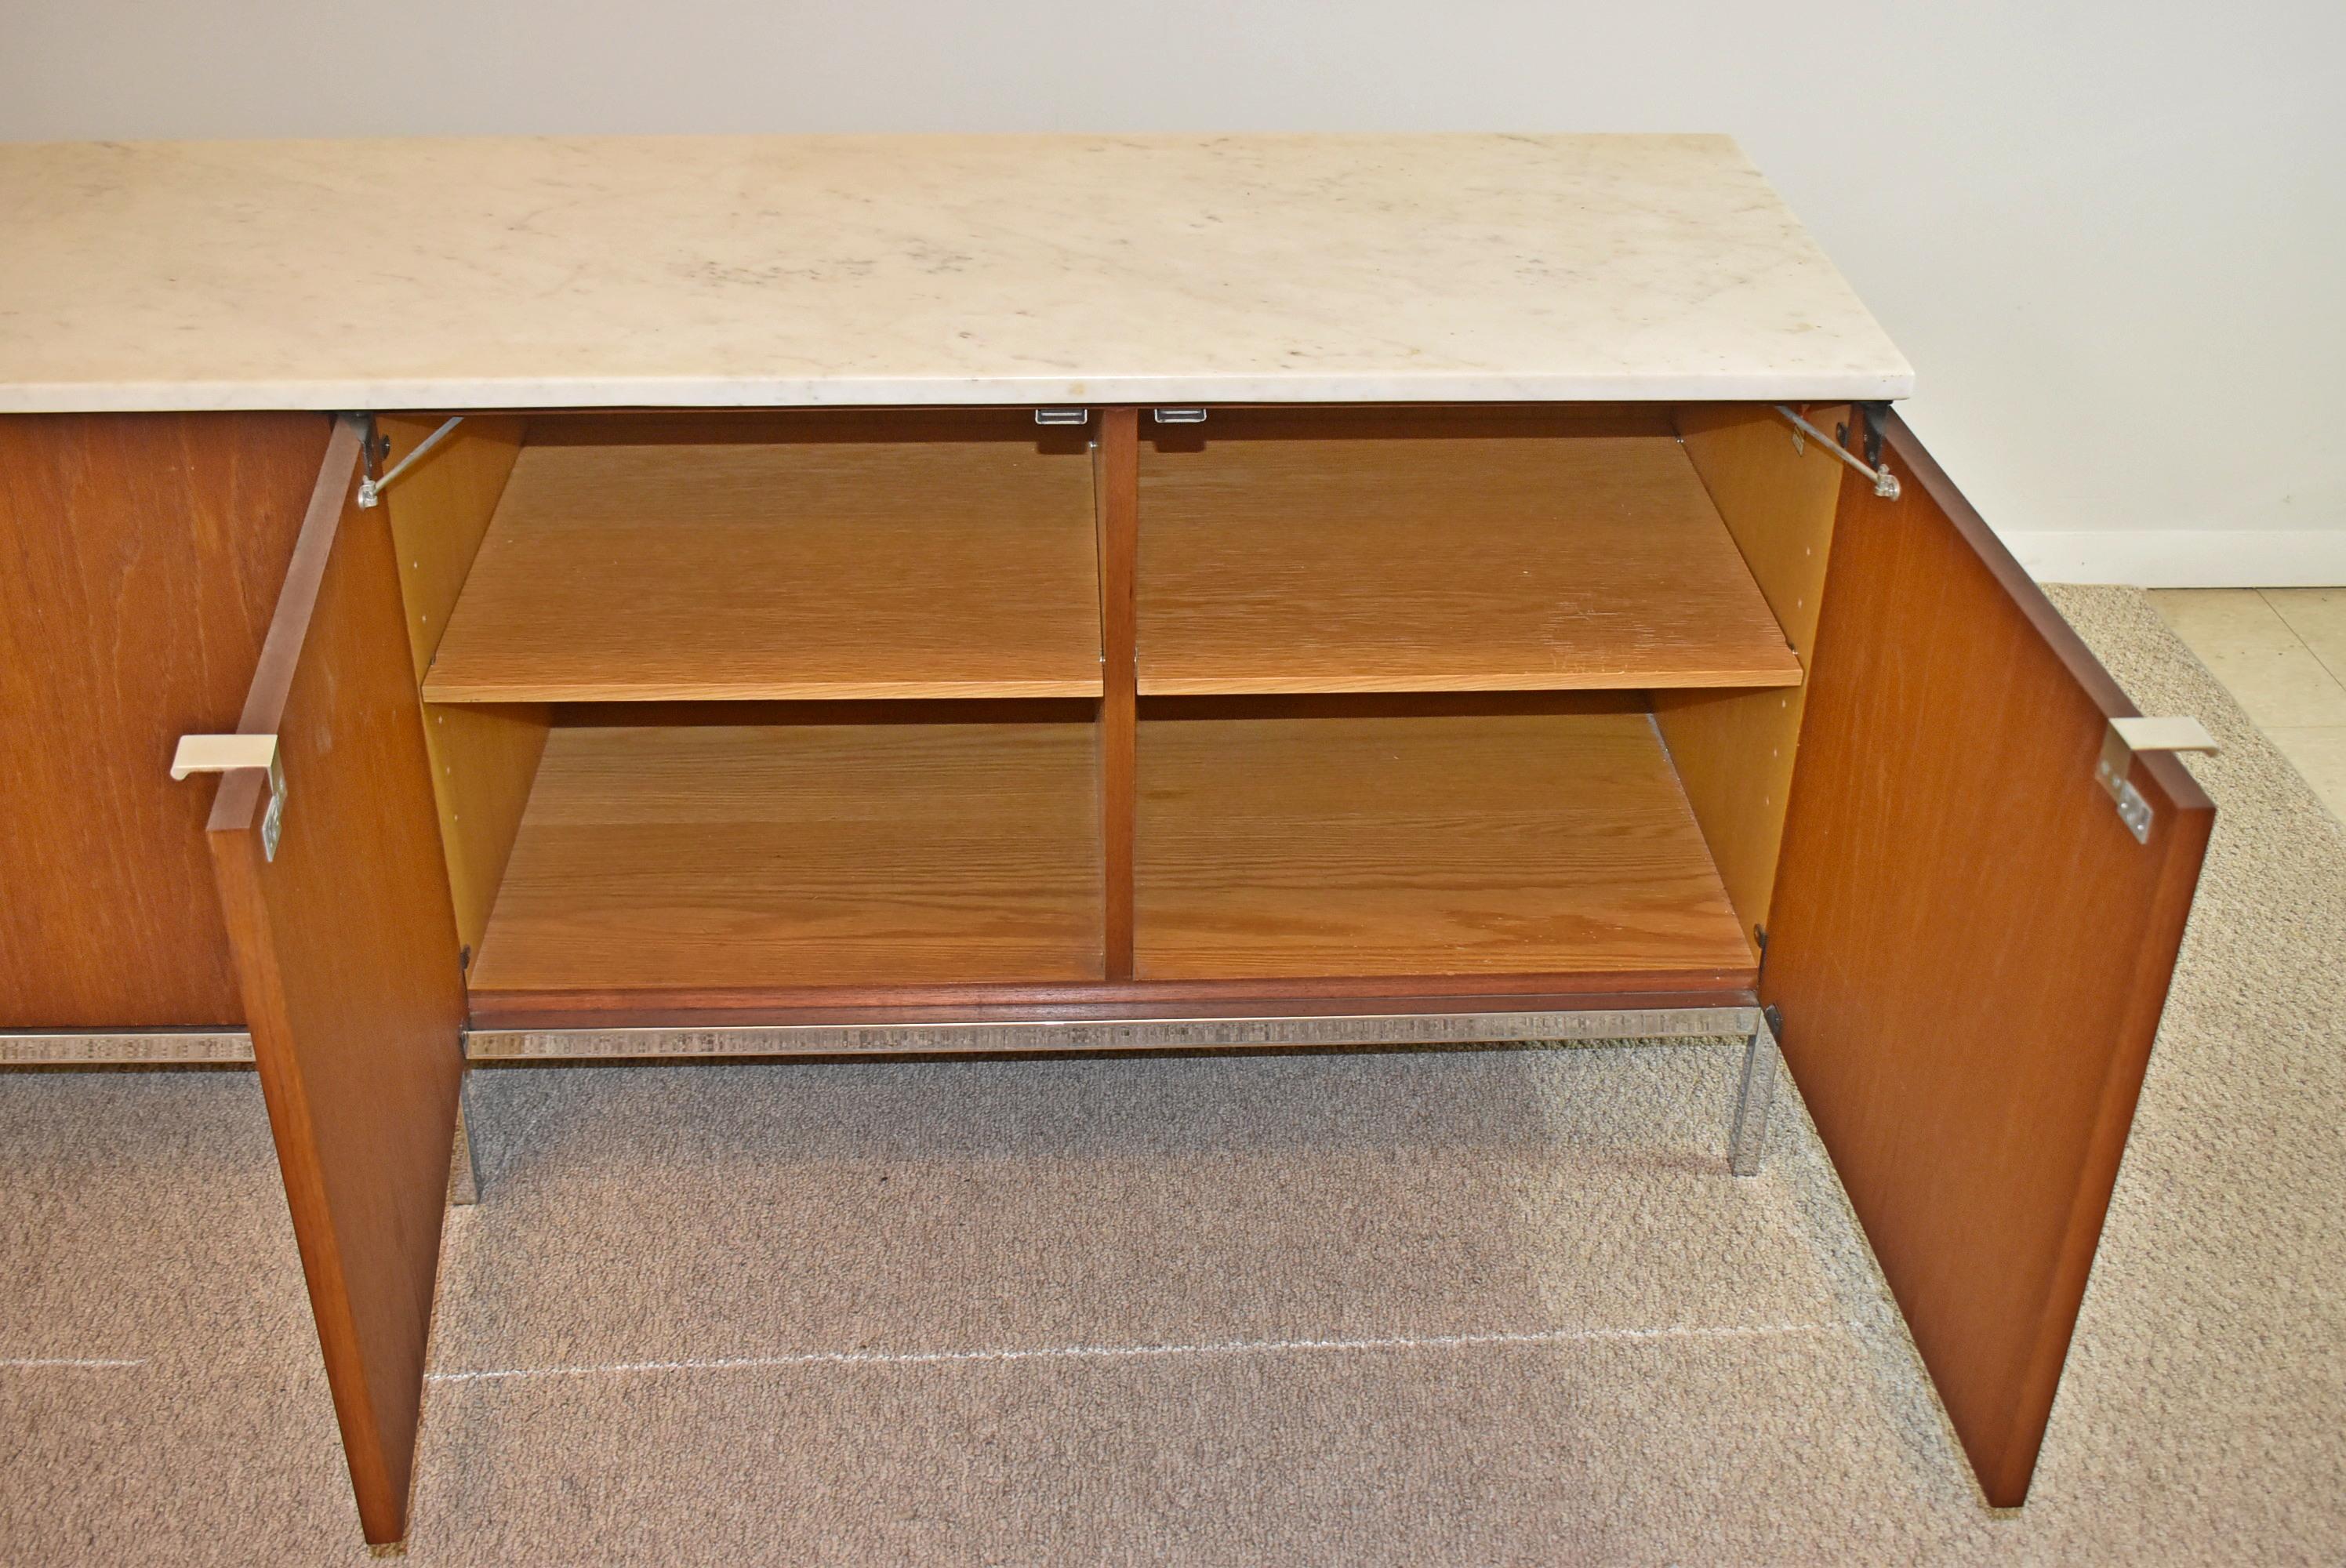 Knoll Walnut credenza with marble top. Circa 20th century around 1952. Walnut 4 door credenza on a square tube chrome frame with adjustable shelves and a white and grey marble top. Great condition, consistent with wear due to age and usage. Knoll